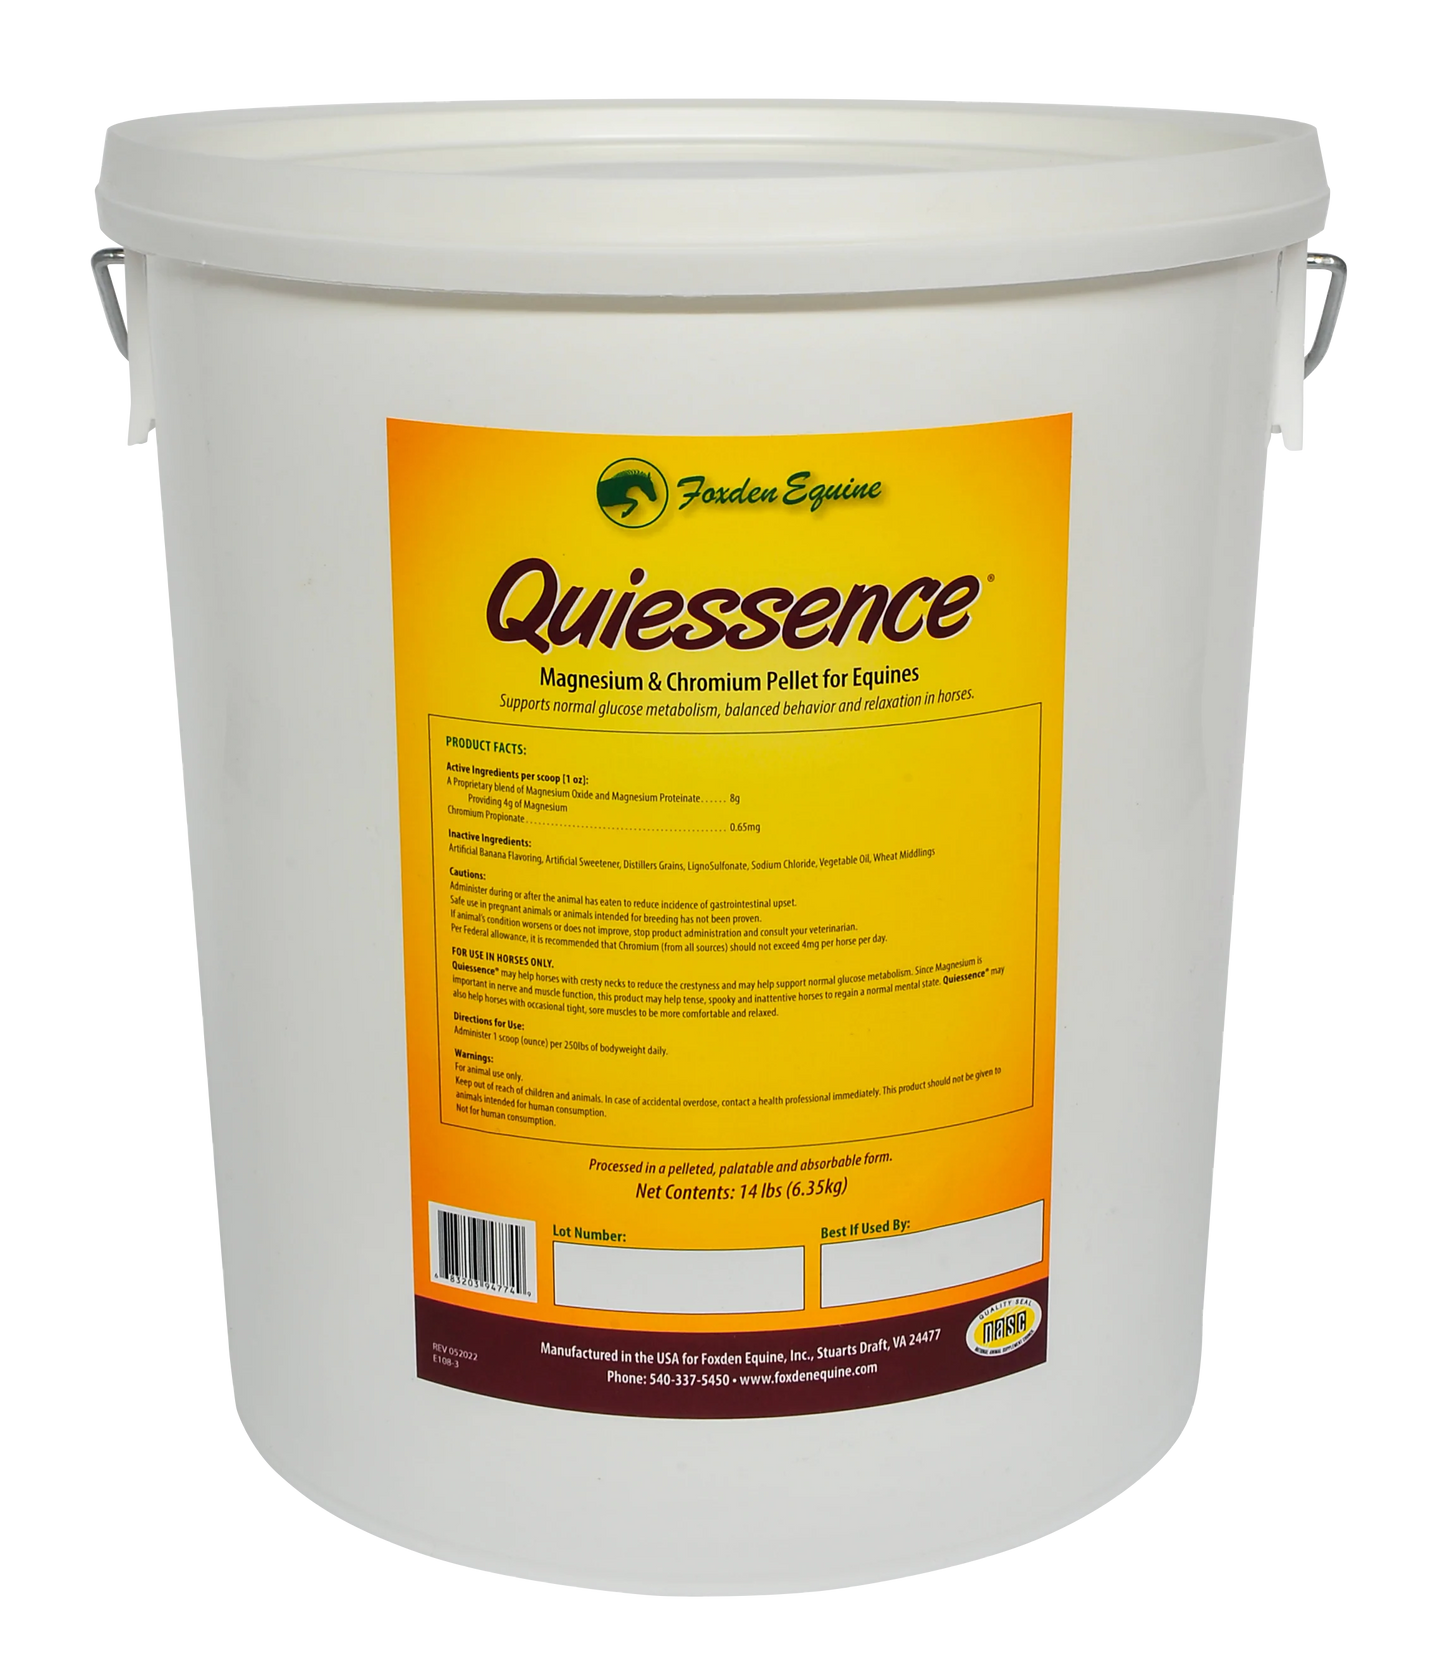 Quiessence™ Magnesium and Chromium Formula for Horses by Foxden